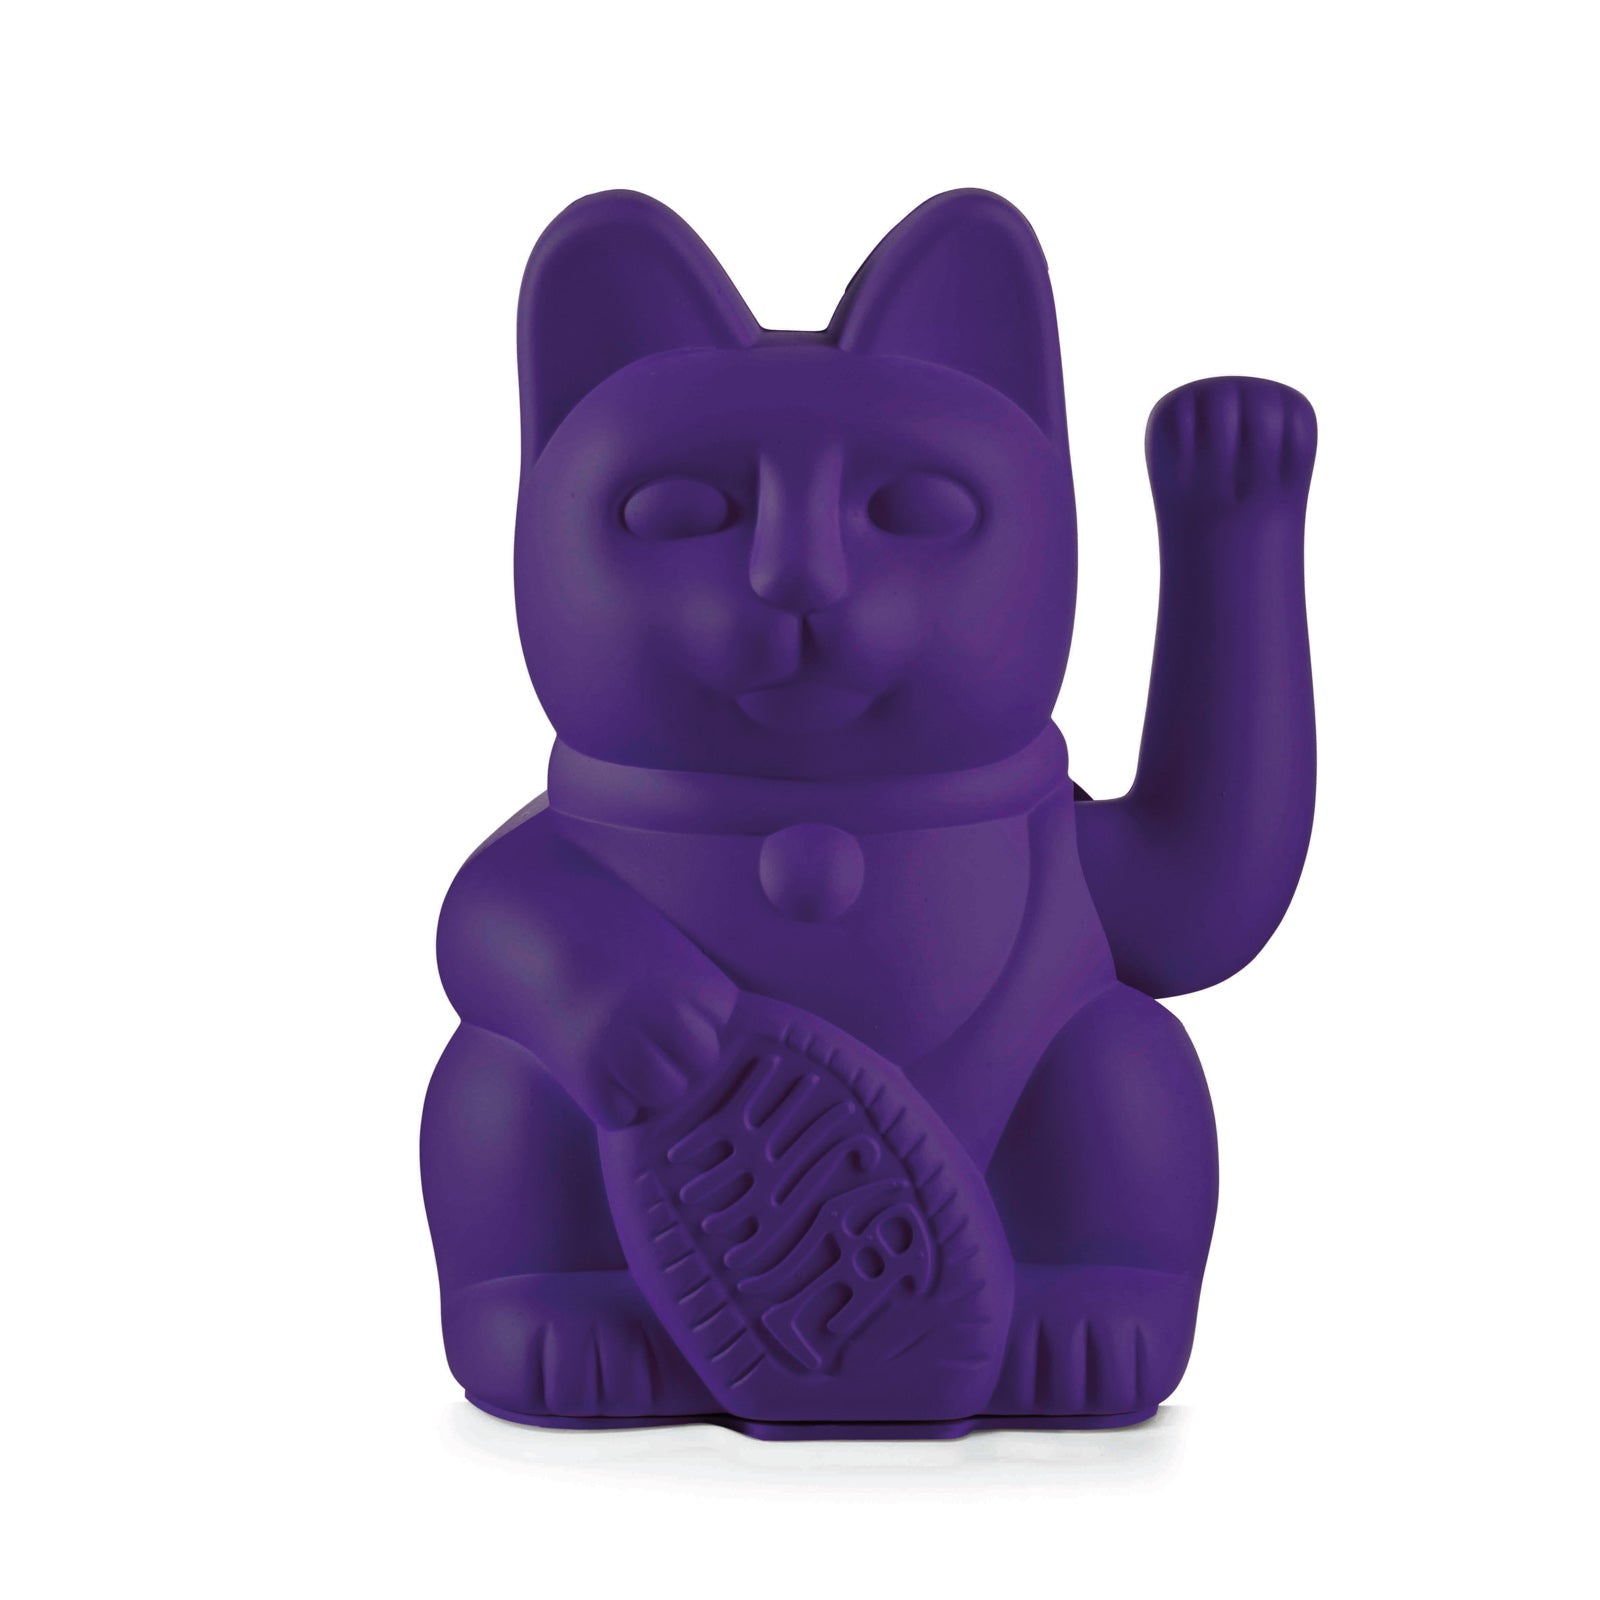 Lucky Cat violet - donkey products